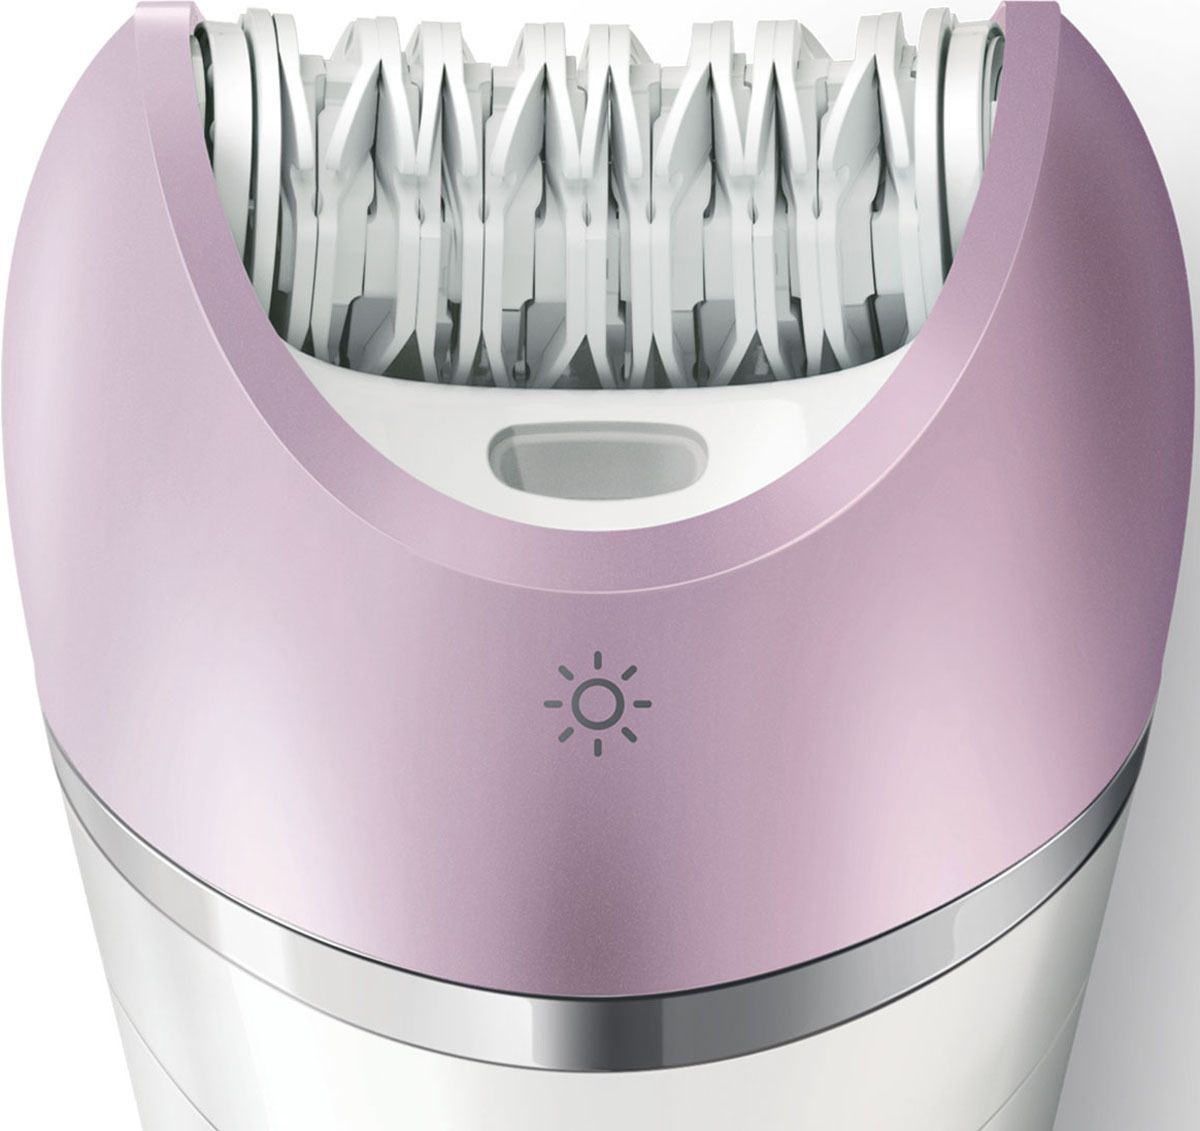  5  1 Philips Satinelle Advanced, BRE632/00, c  , White Pink